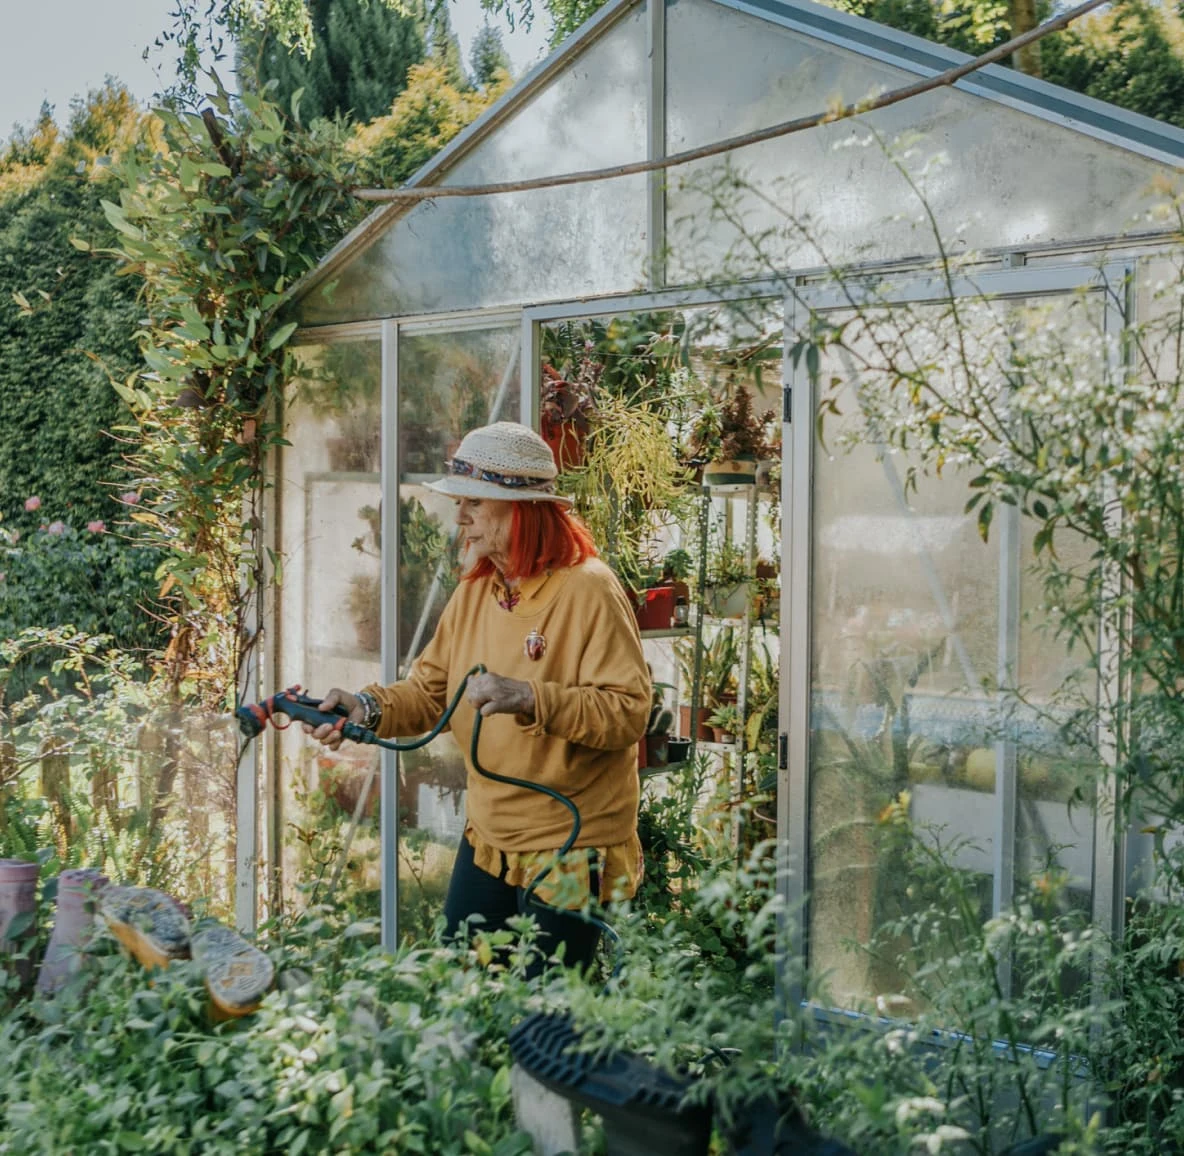 a White woman in a straw hat waters plants outside a greenhouse